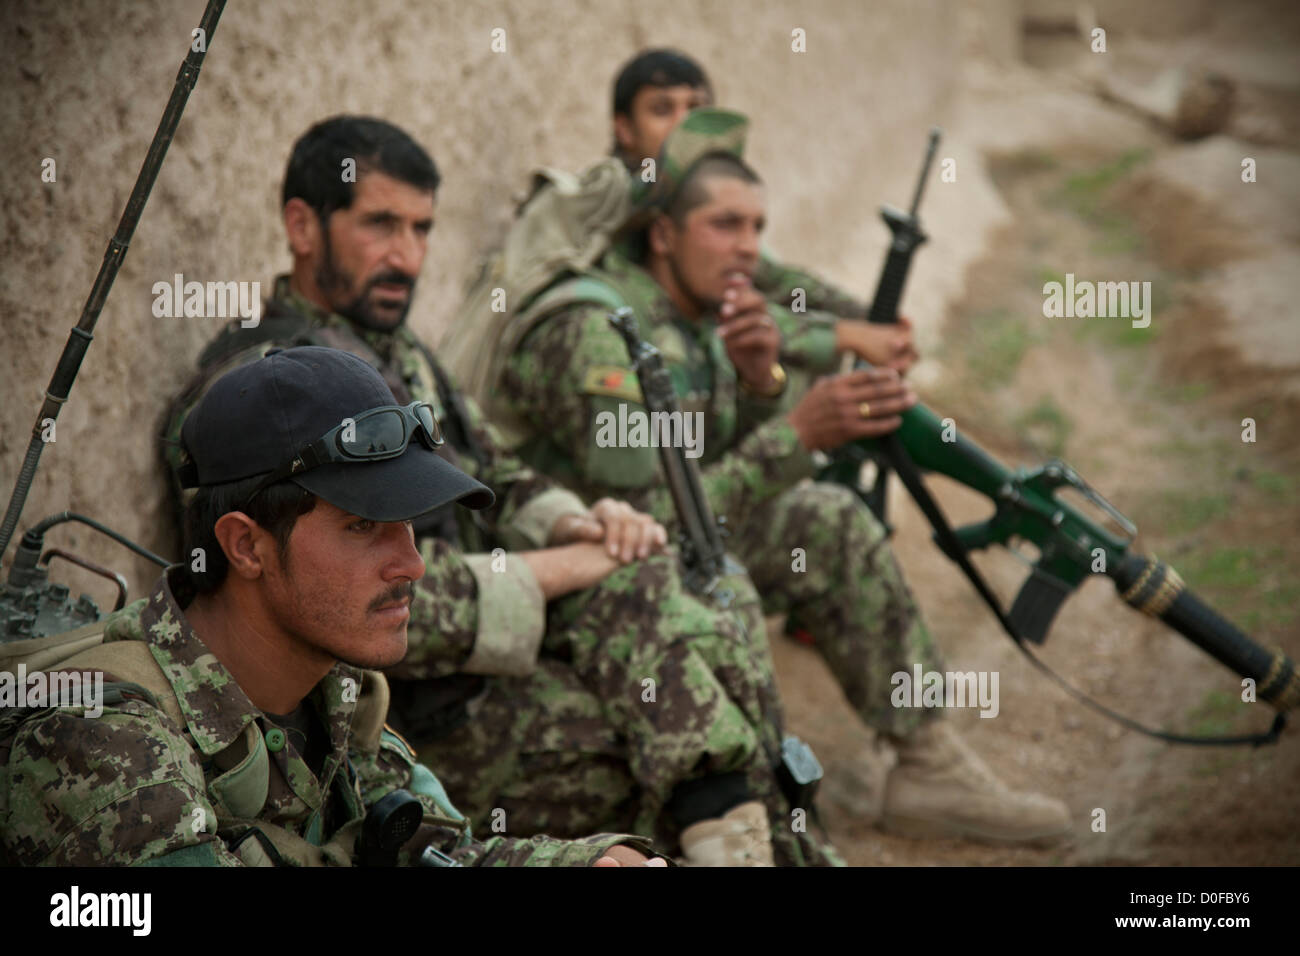 Afghan National Security Forces rest during a joint security patrol with US Special Force members October 30, 2012 in Khak-E-Safed, Farah province, Afghanistan. Afghan forces have been taking the lead in security operations with coalition forces as mentors. Stock Photo